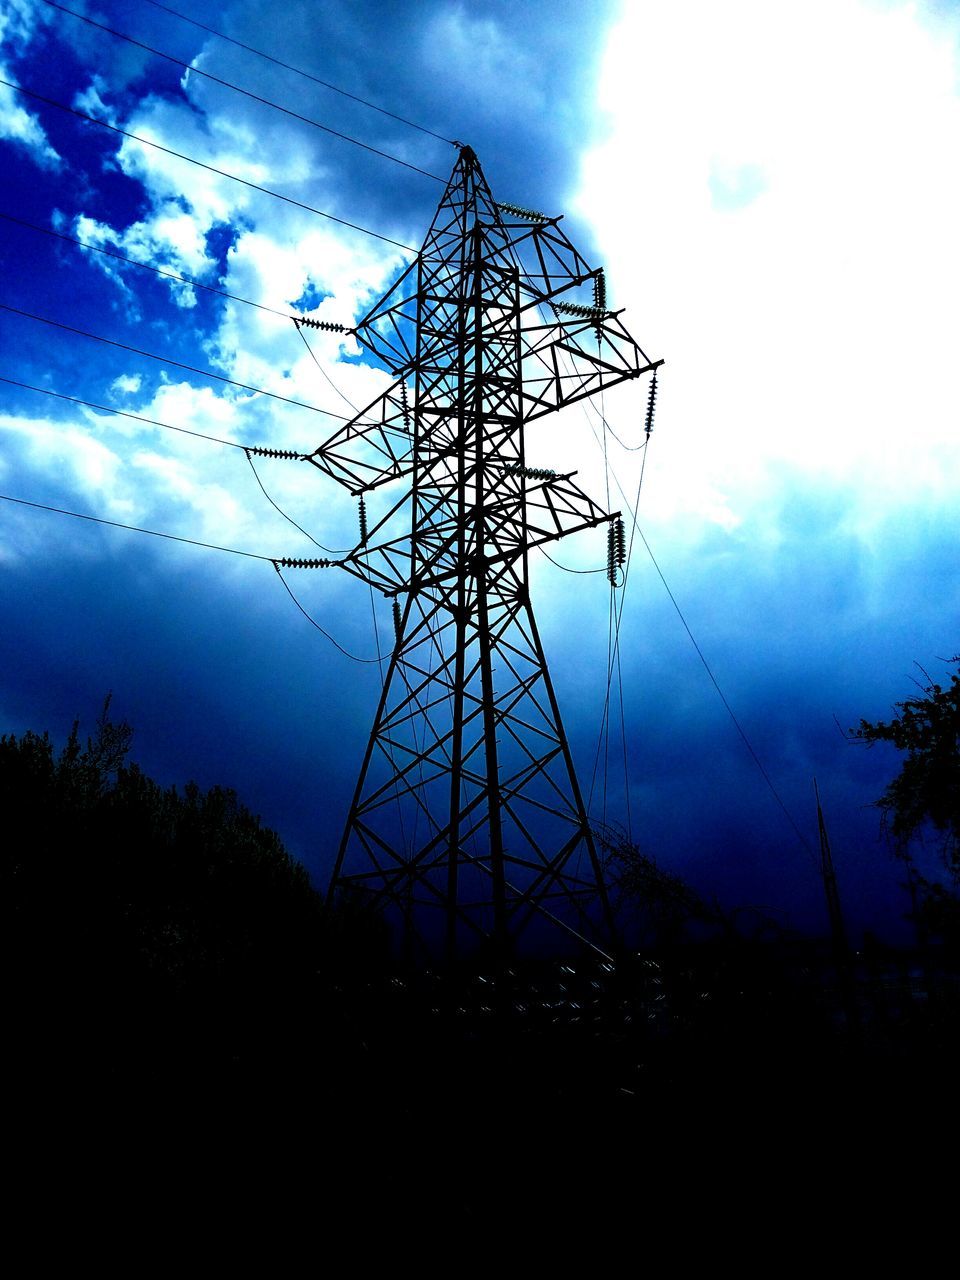 electricity pylon, silhouette, electricity, low angle view, sky, power line, power supply, fuel and power generation, cloud - sky, technology, connection, cable, cloud, dusk, cloudy, nature, tree, outdoors, no people, sunset